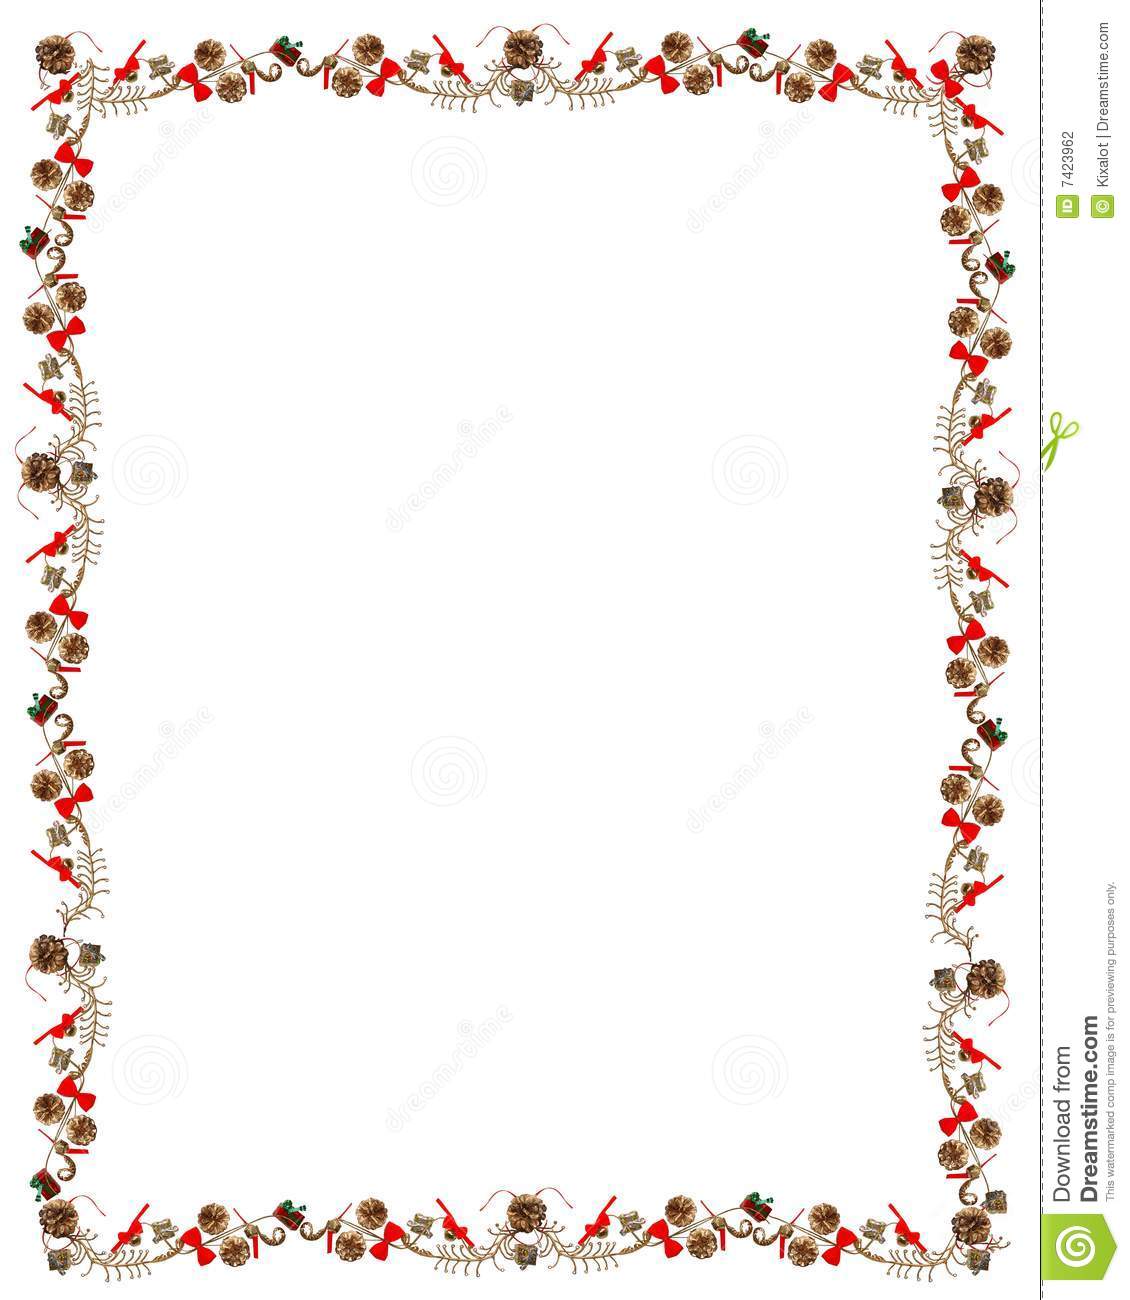 Fiesta Borders And Frames Ideal Border For Holiday